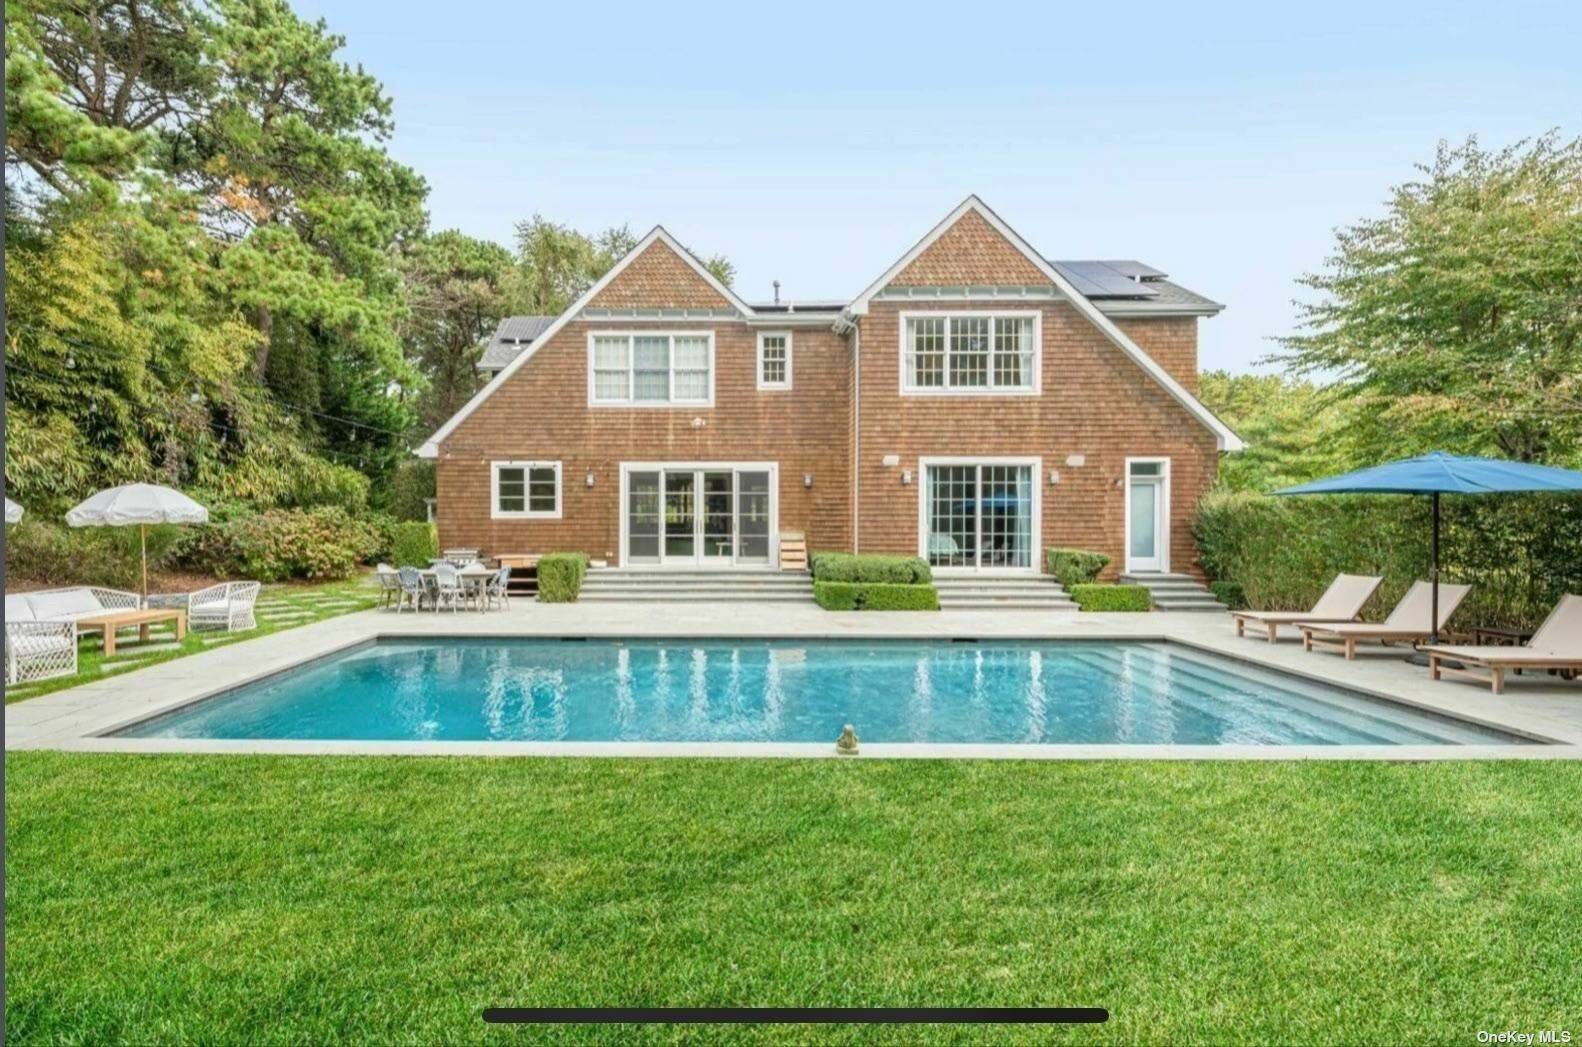 Elegant, Immaculate and Newly Renovated Southampton Rental Minutes to Southampton Village and Beach Ideally situated within minutes of Southampton Village and ocean and bay beaches, welcome to this professionally designed ...